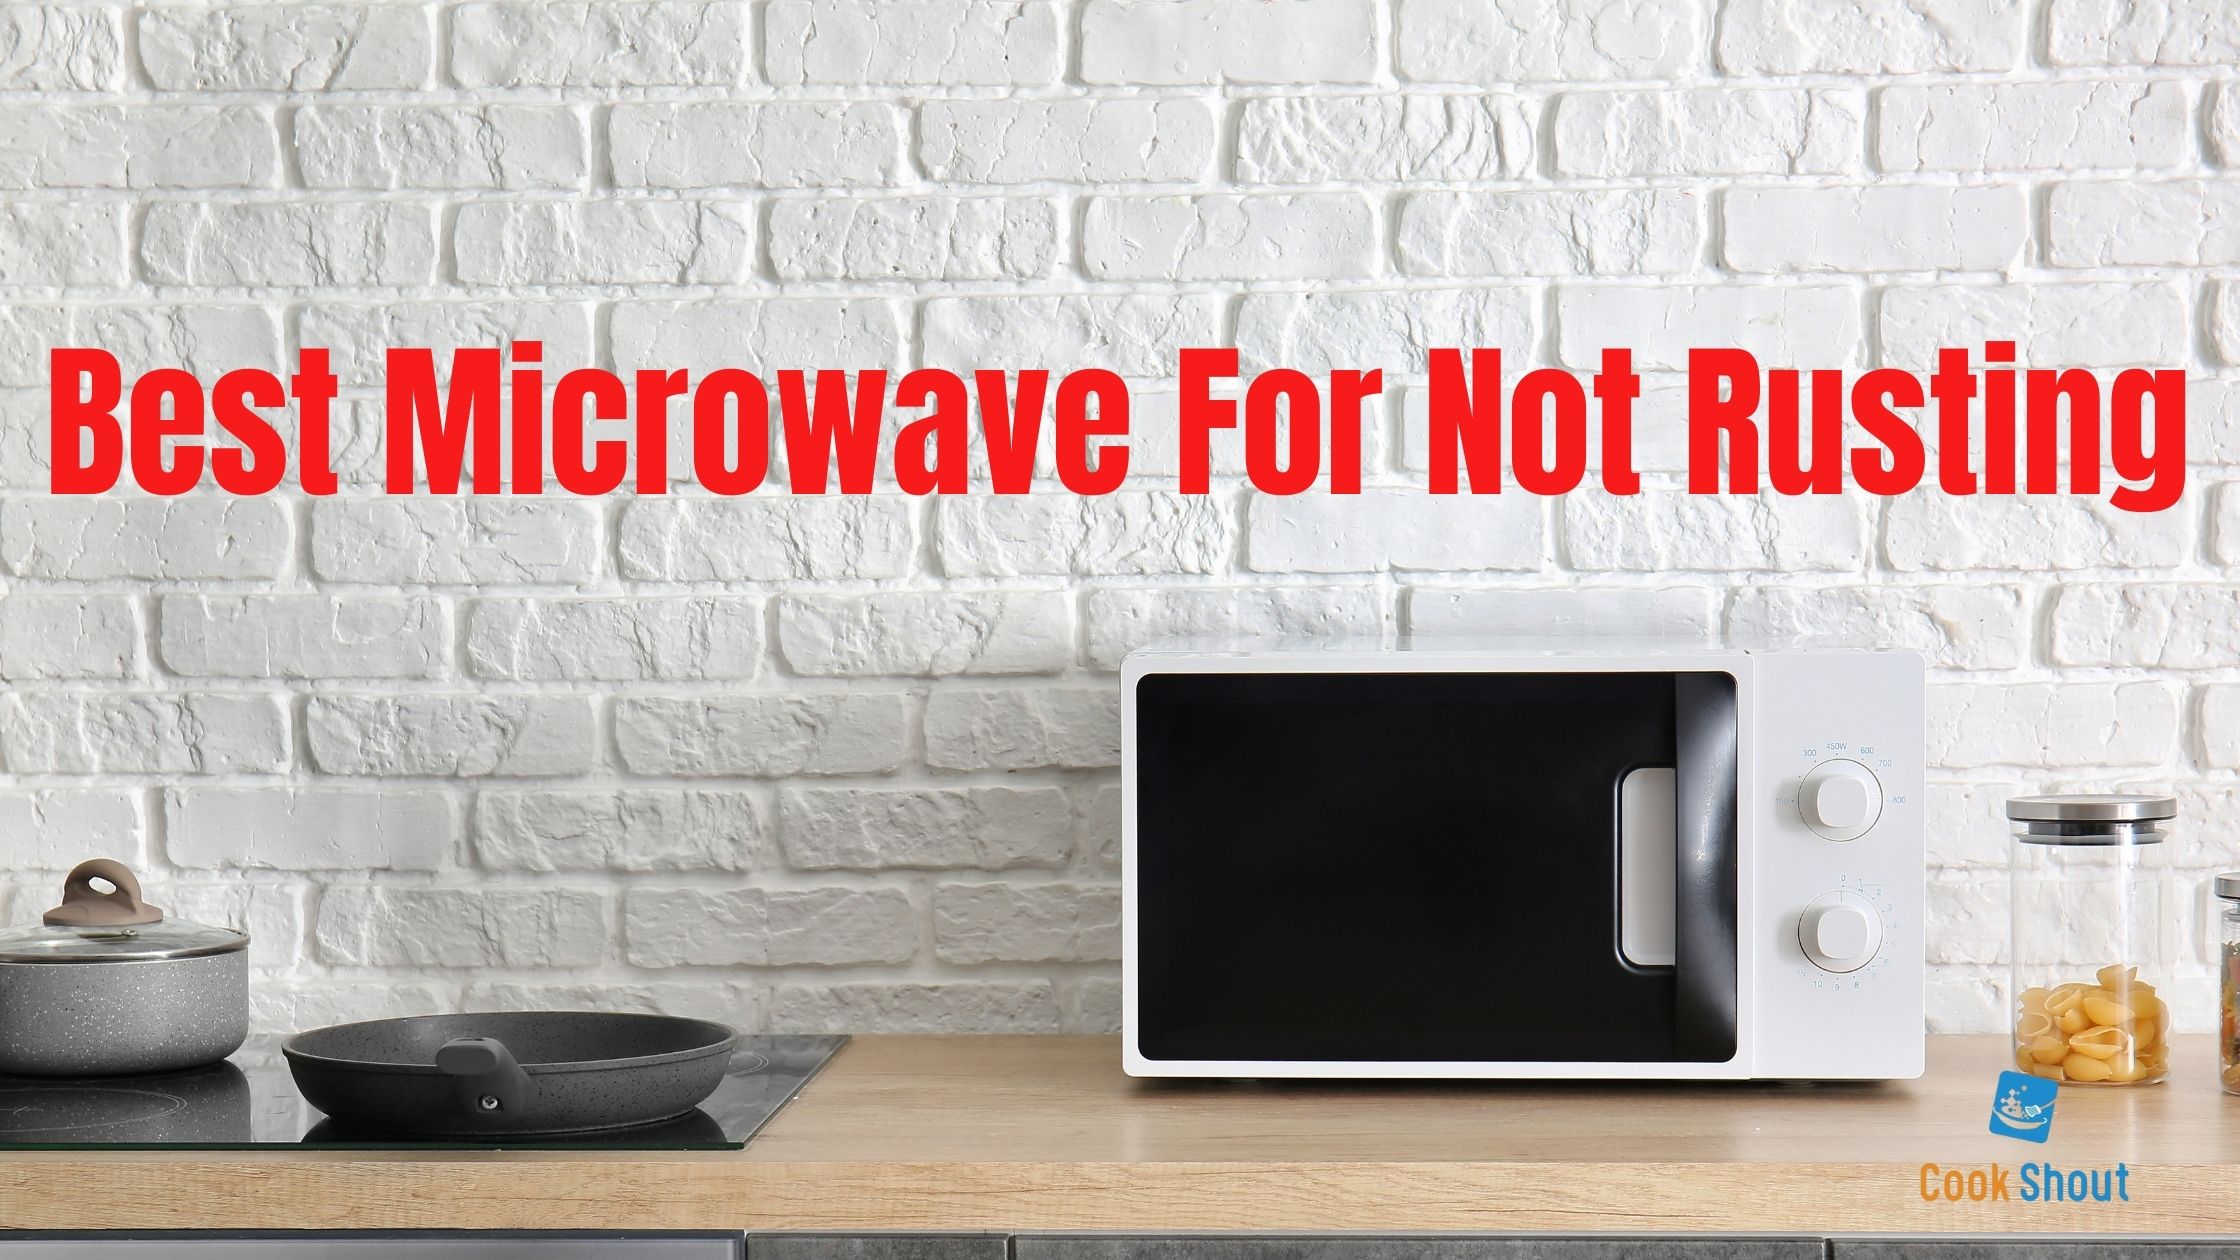 Best Microwave for Not Rusting